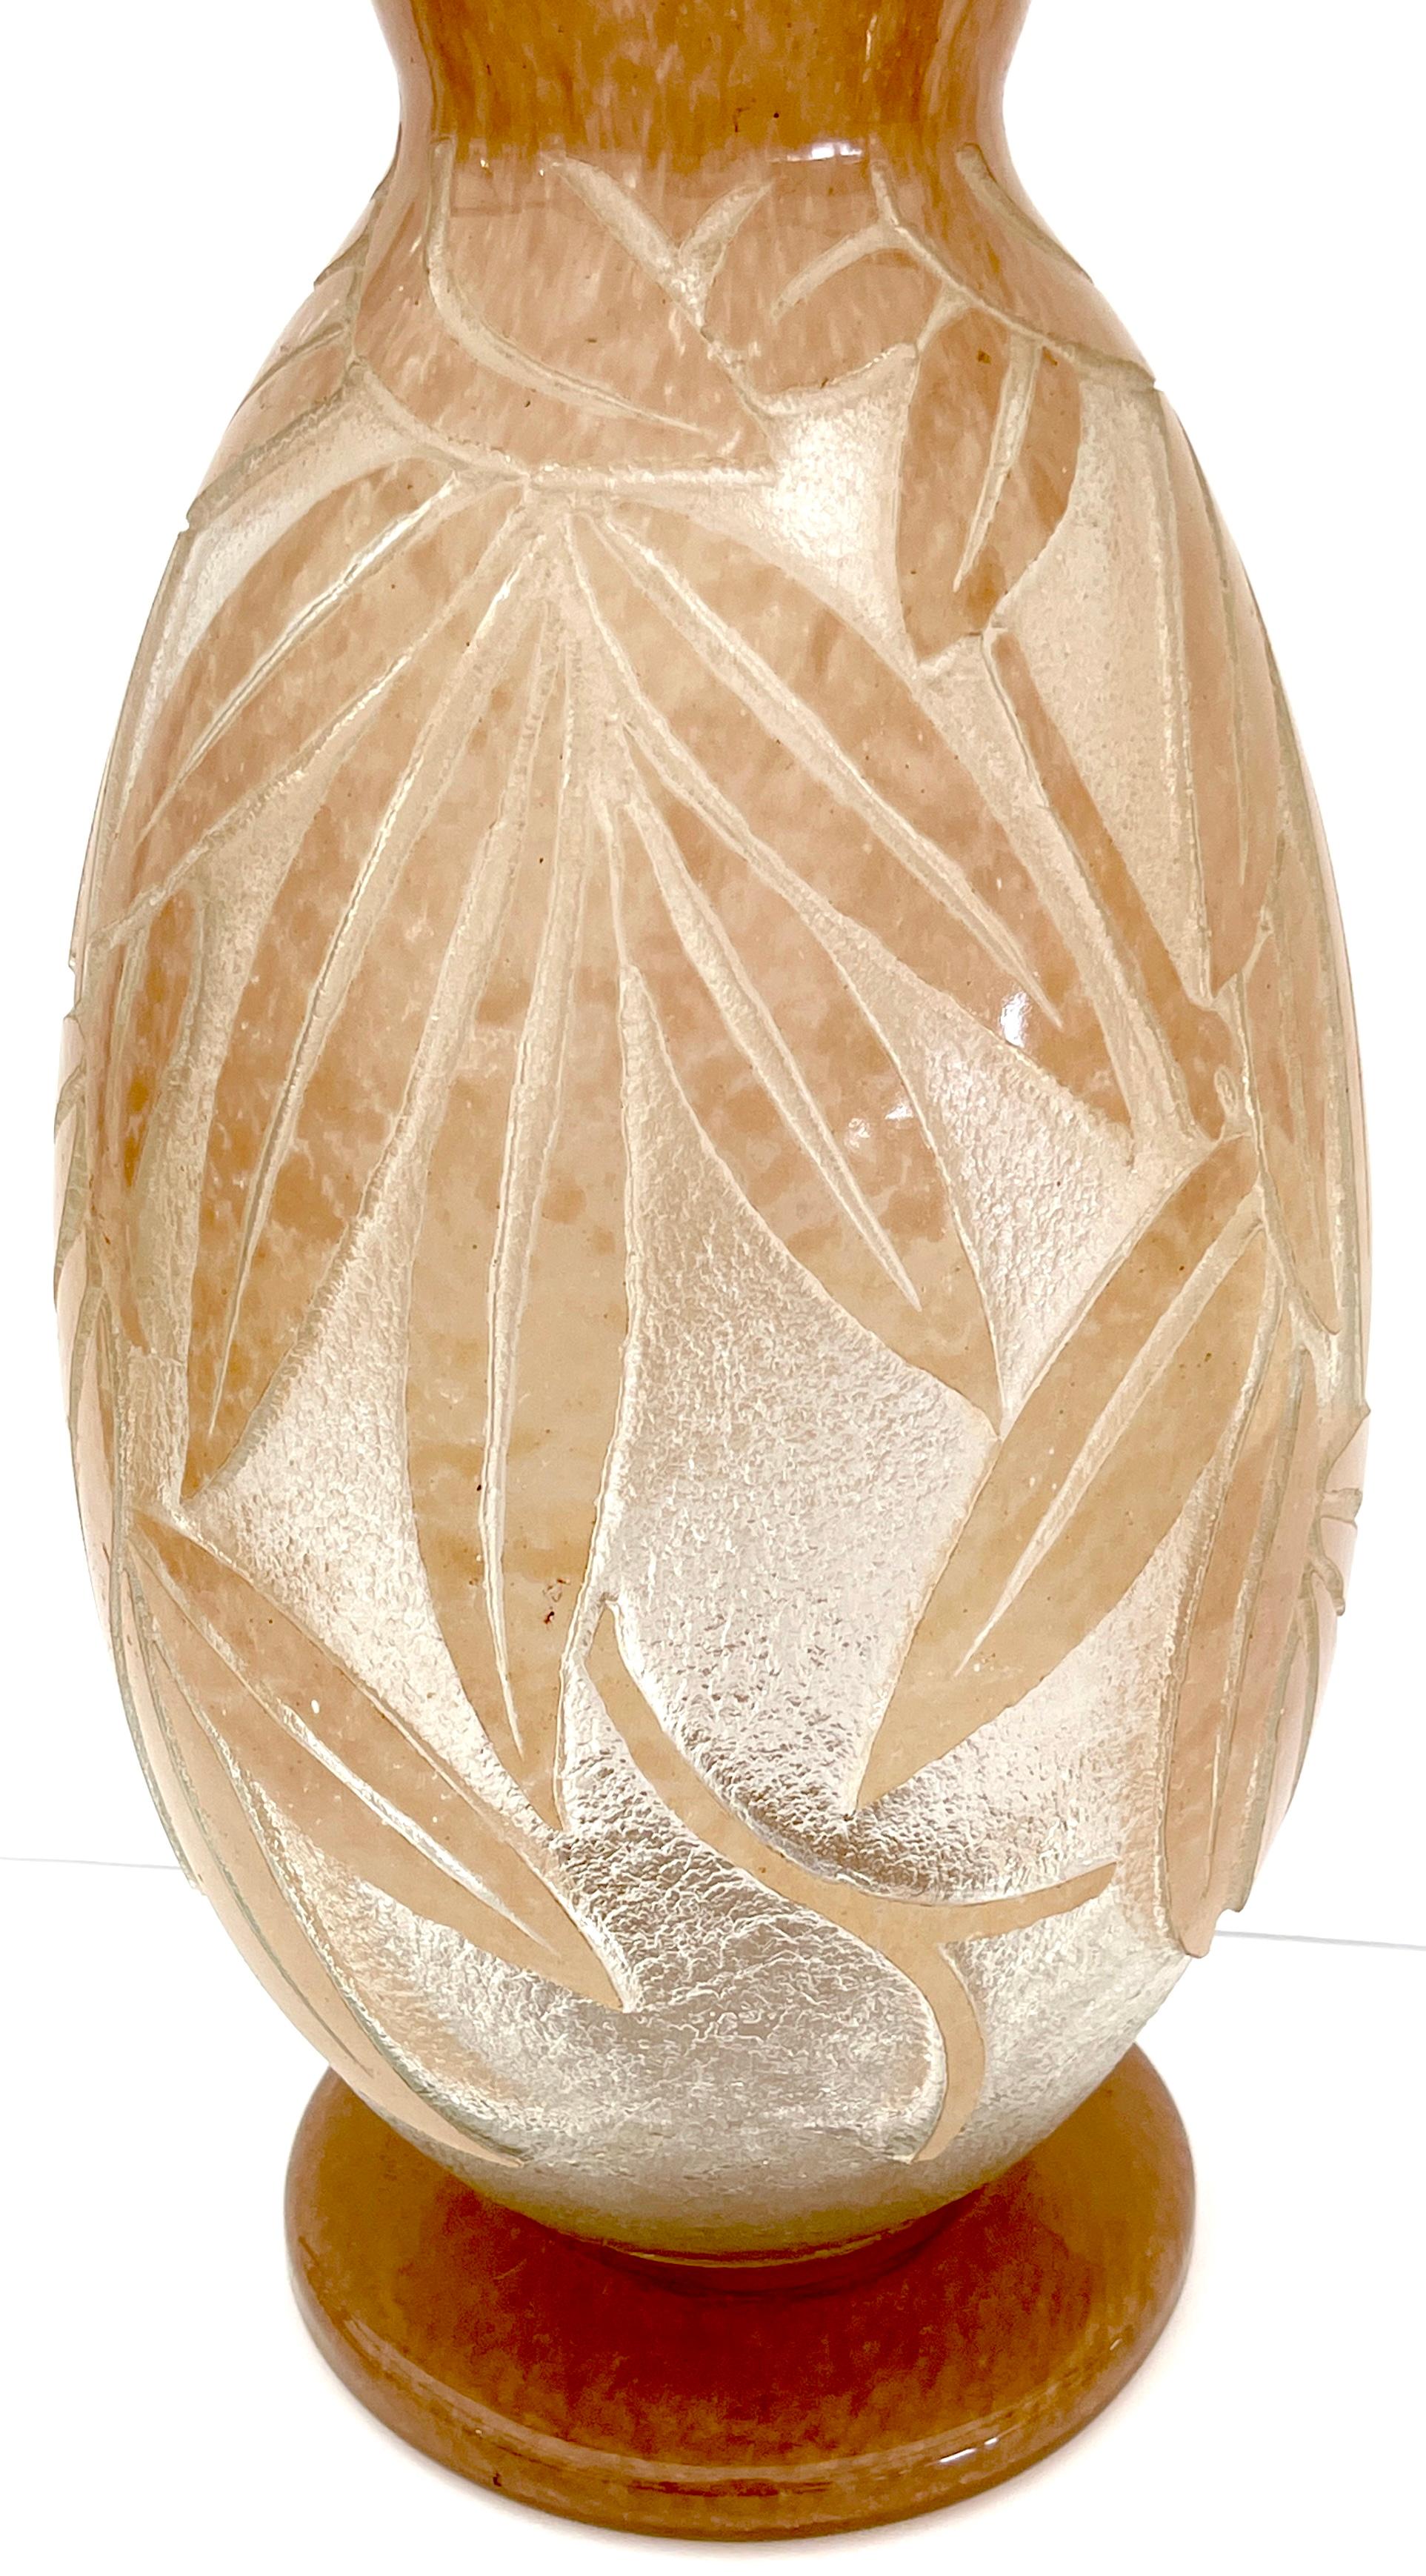 Carved Monumental French Art Deco Palmette Cameo Glass Vase by Degué, Circa 1930s For Sale